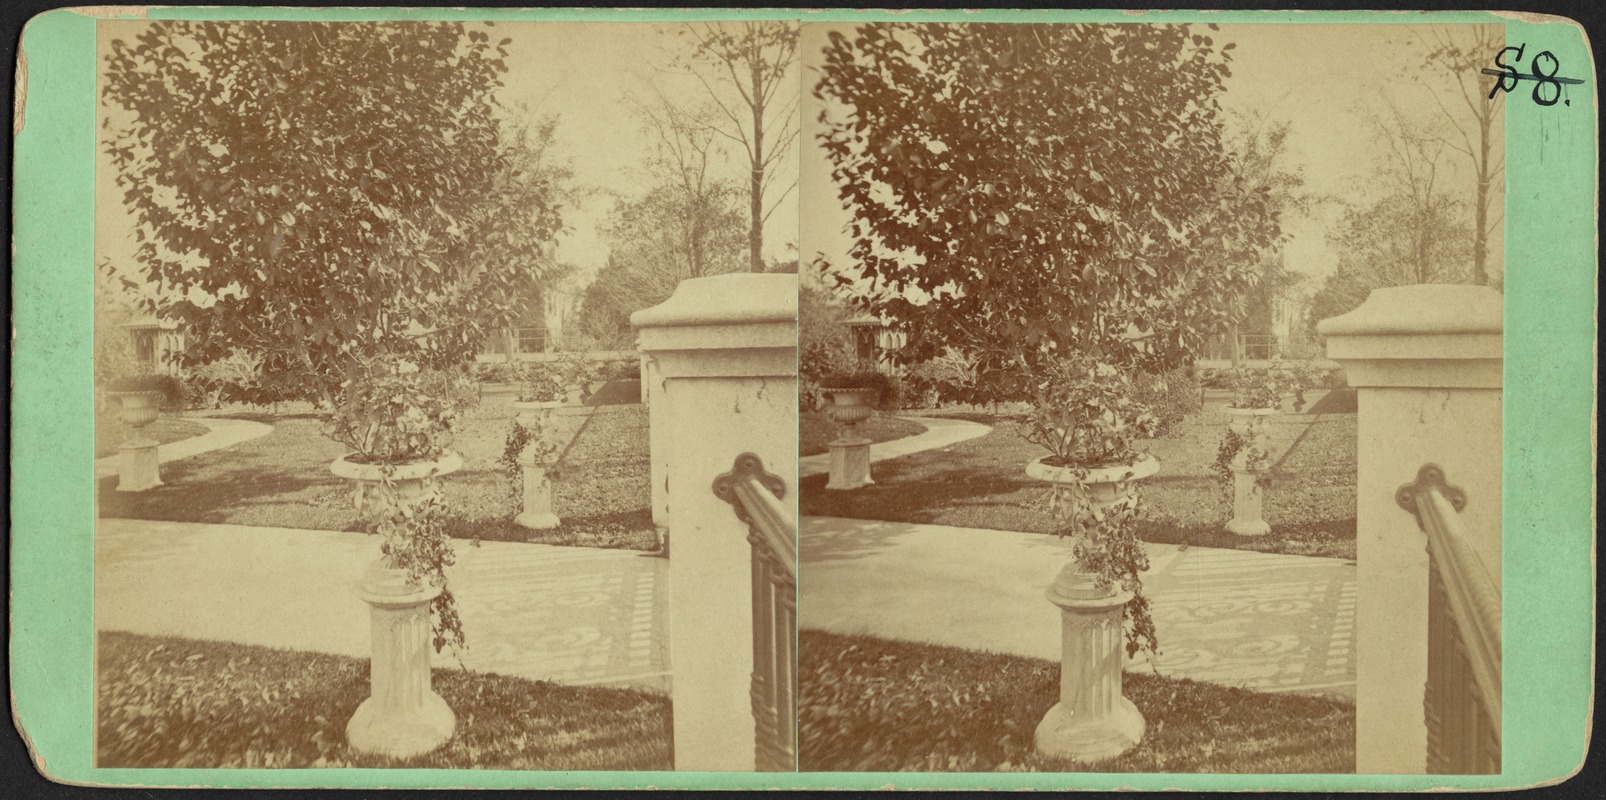 Grounds of Haskell Residence, New Bedford, MA